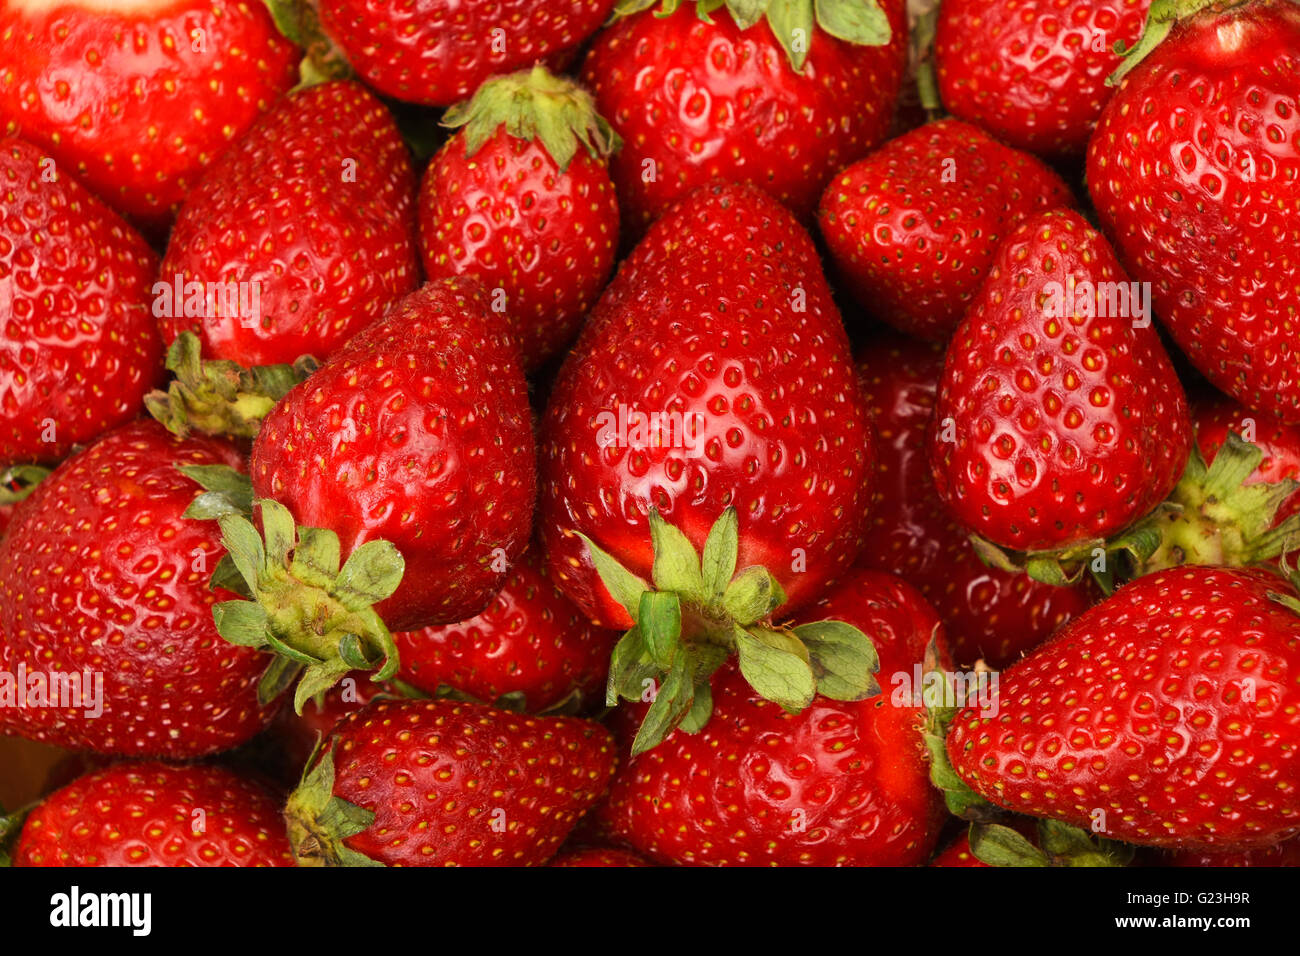 Red fresh mellow strawberry berries close up background Stock Photo